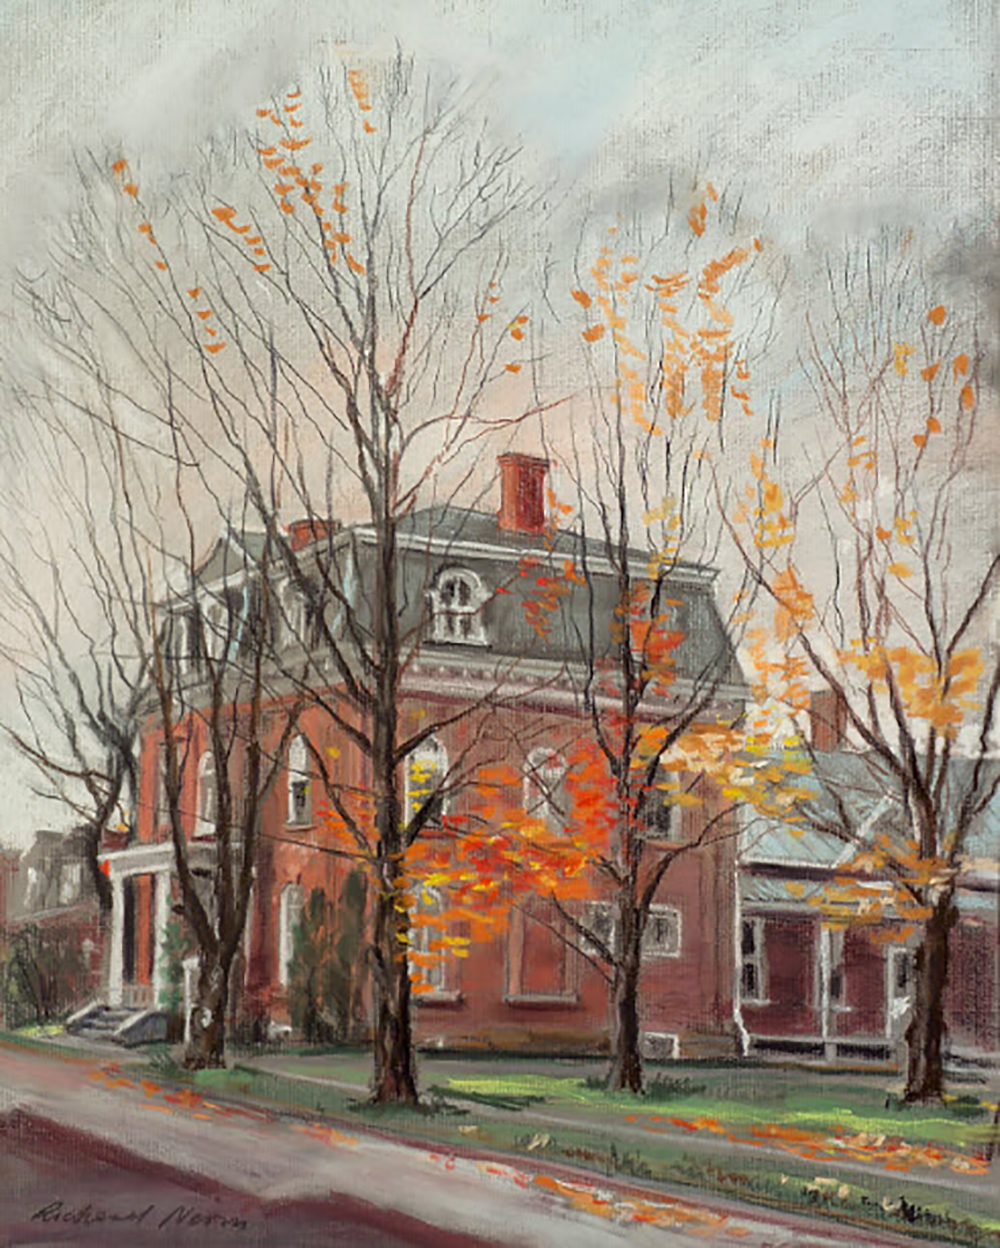 Color painting of a historic red brick building with dormer windows.